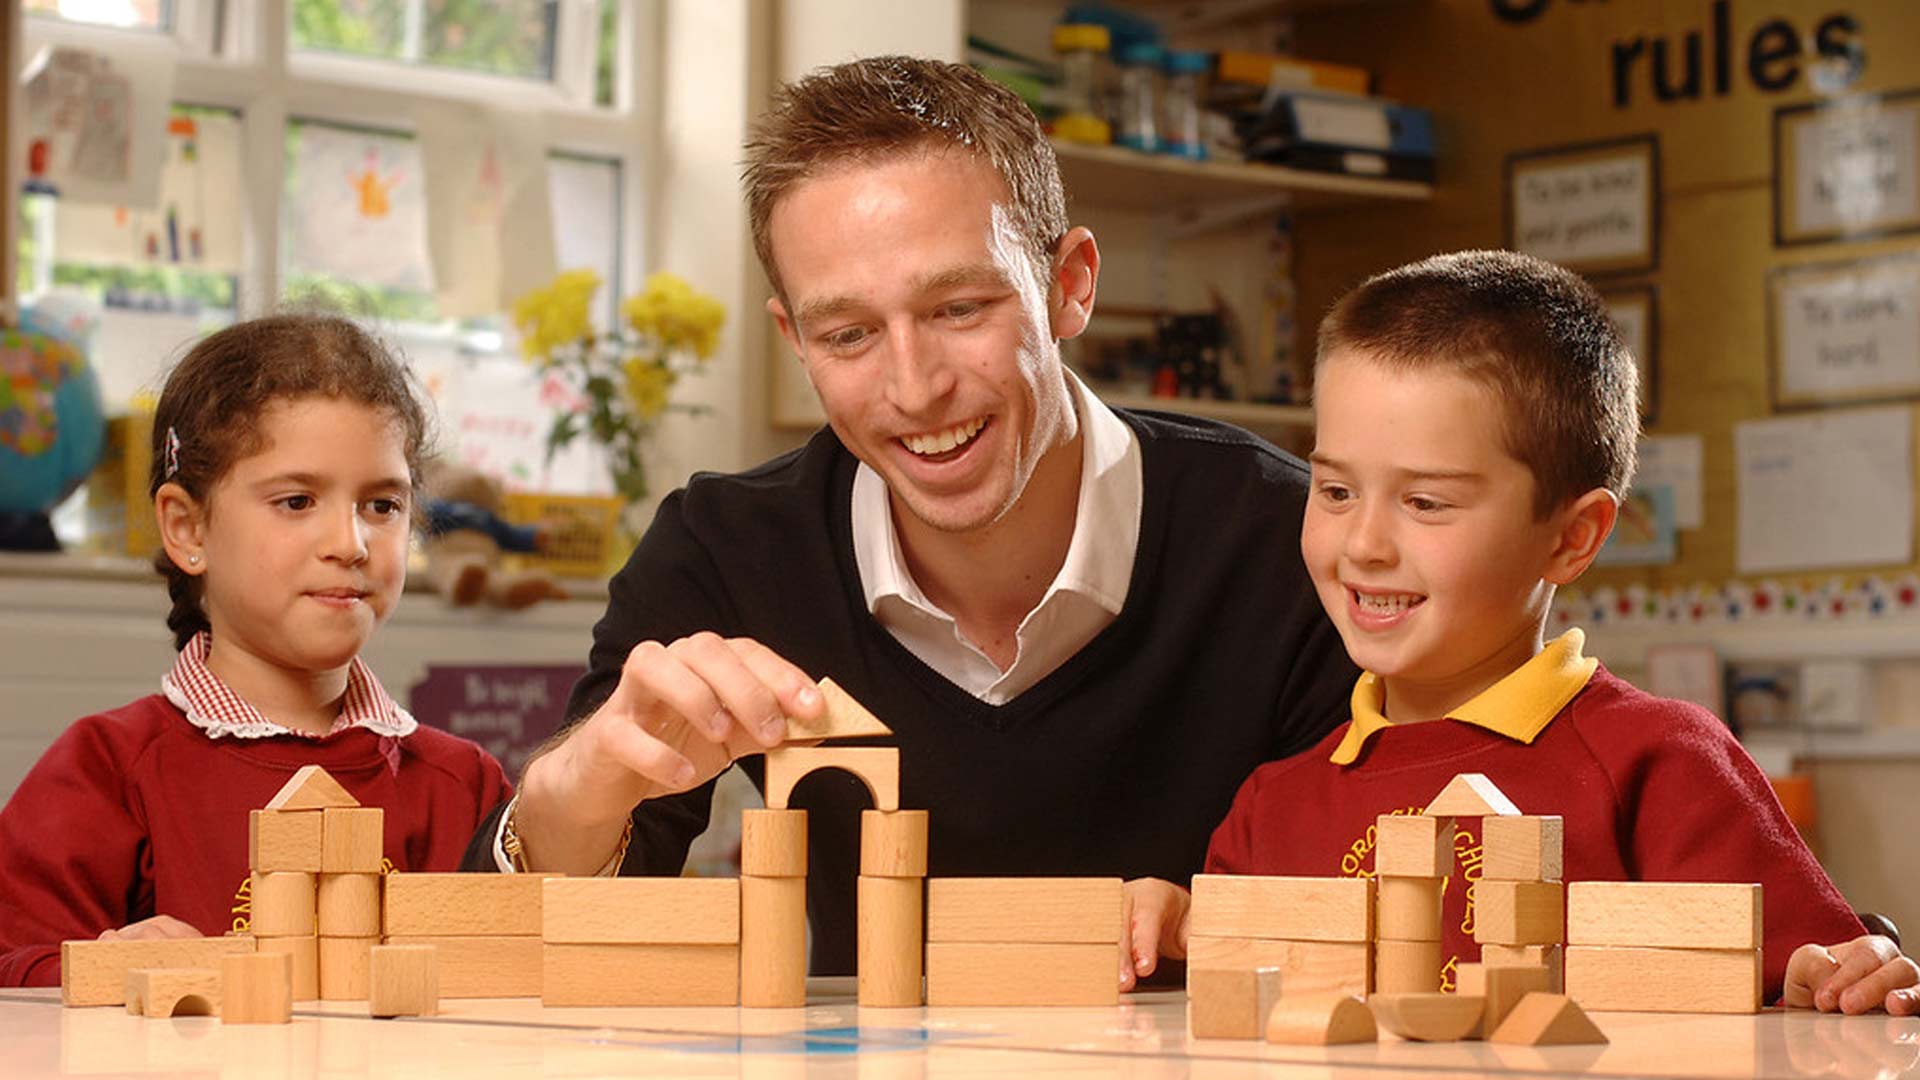 A tutor and two primary school students build with blocks during a Design and Technology class